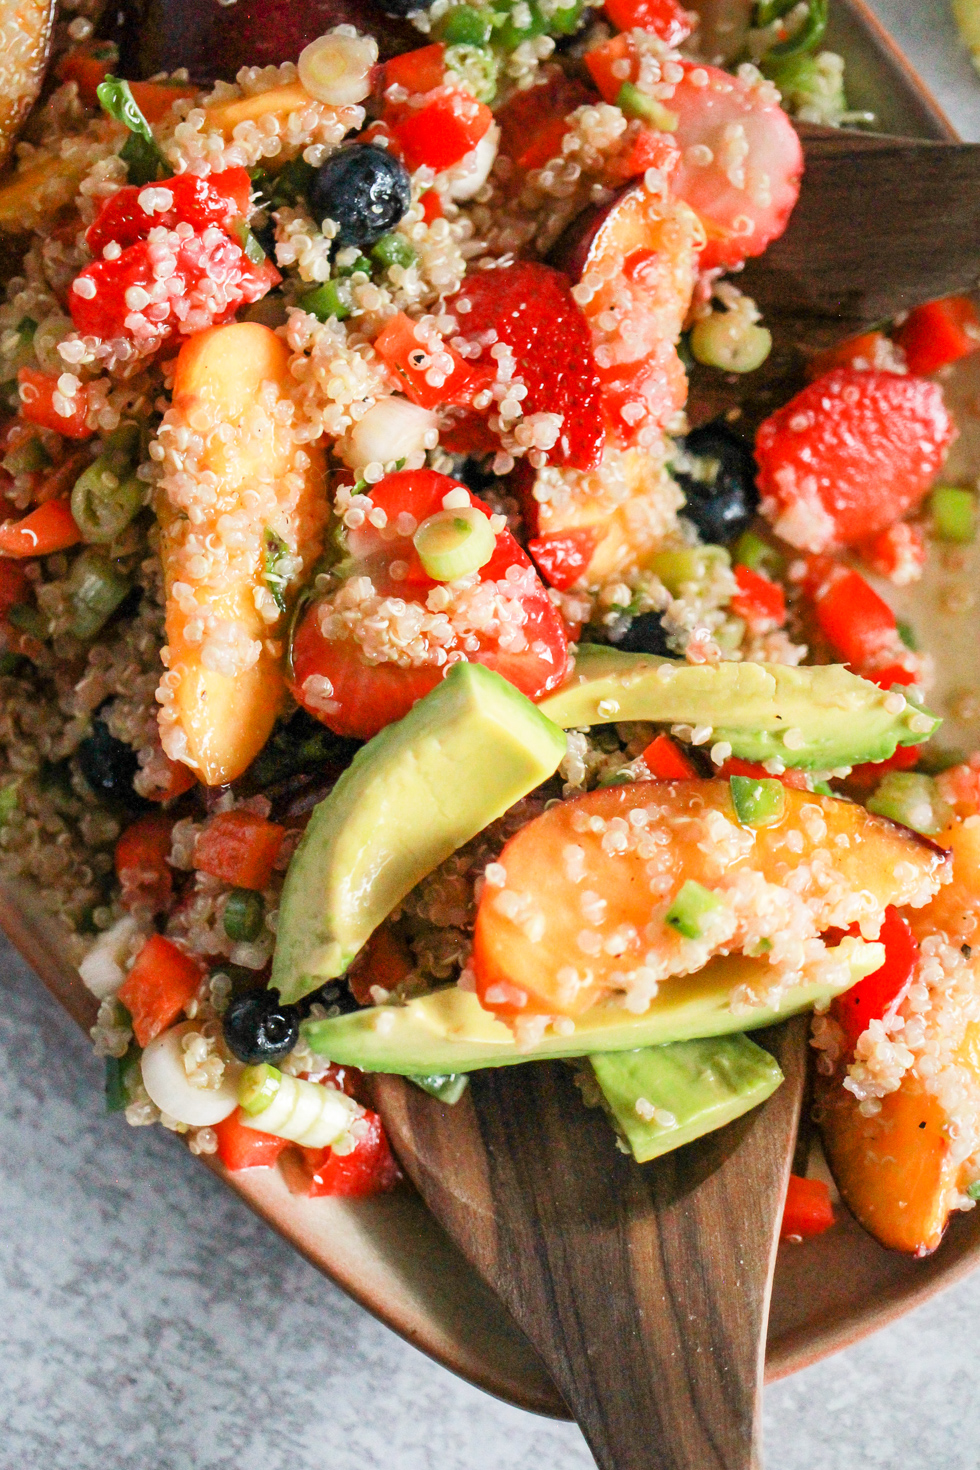 Quinoa salad with avocado and fruit on tan platter with wood spoons.